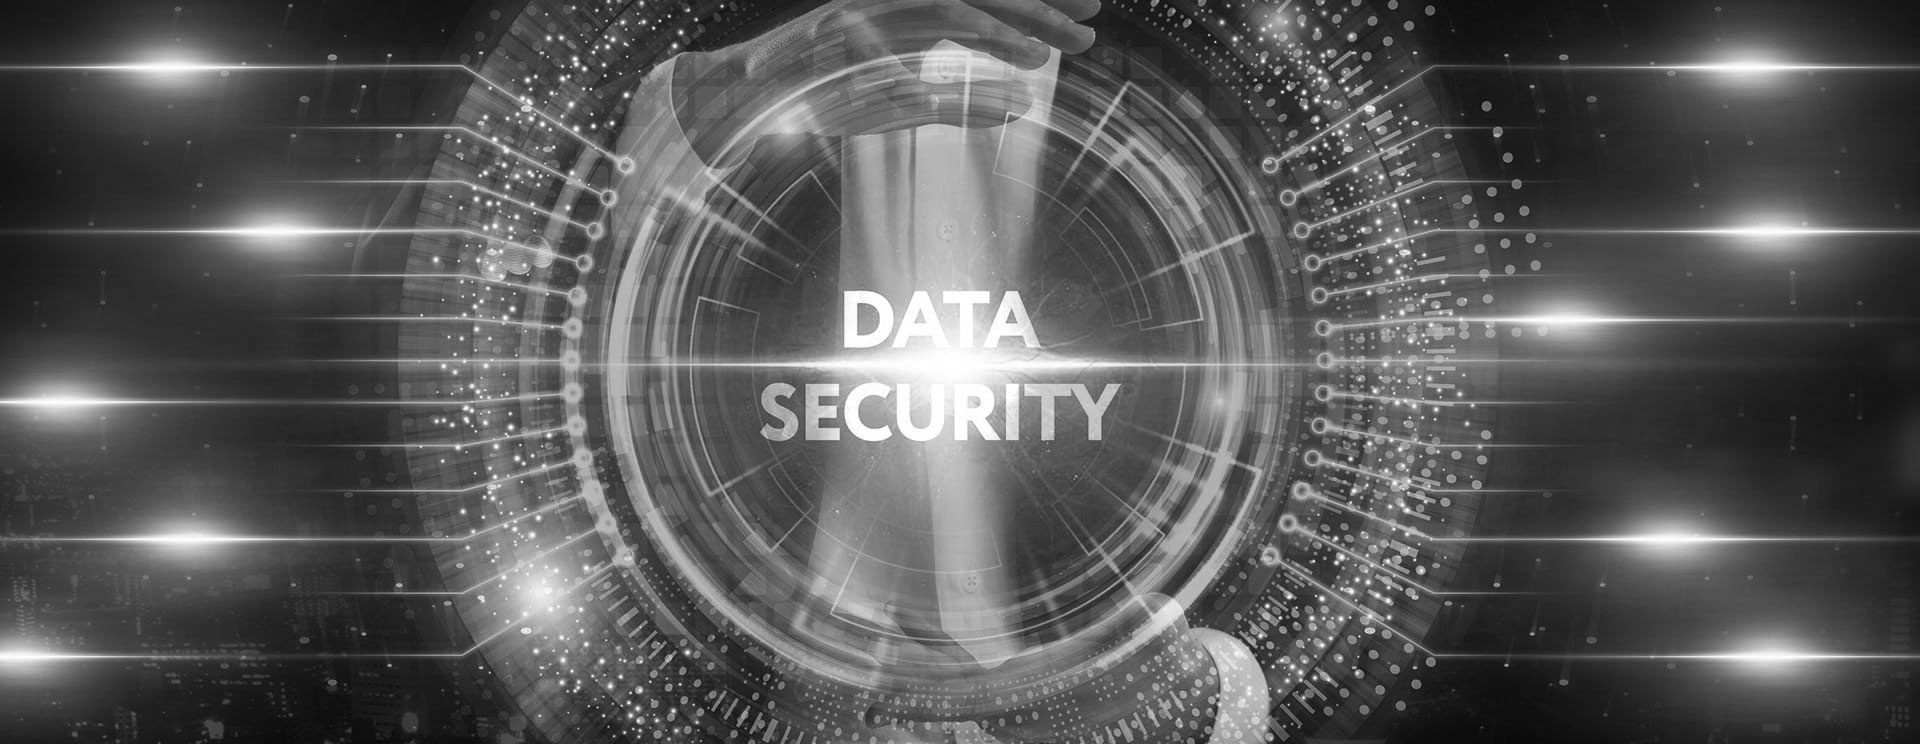 Top 6 Data Security Challenges and How to Address Them